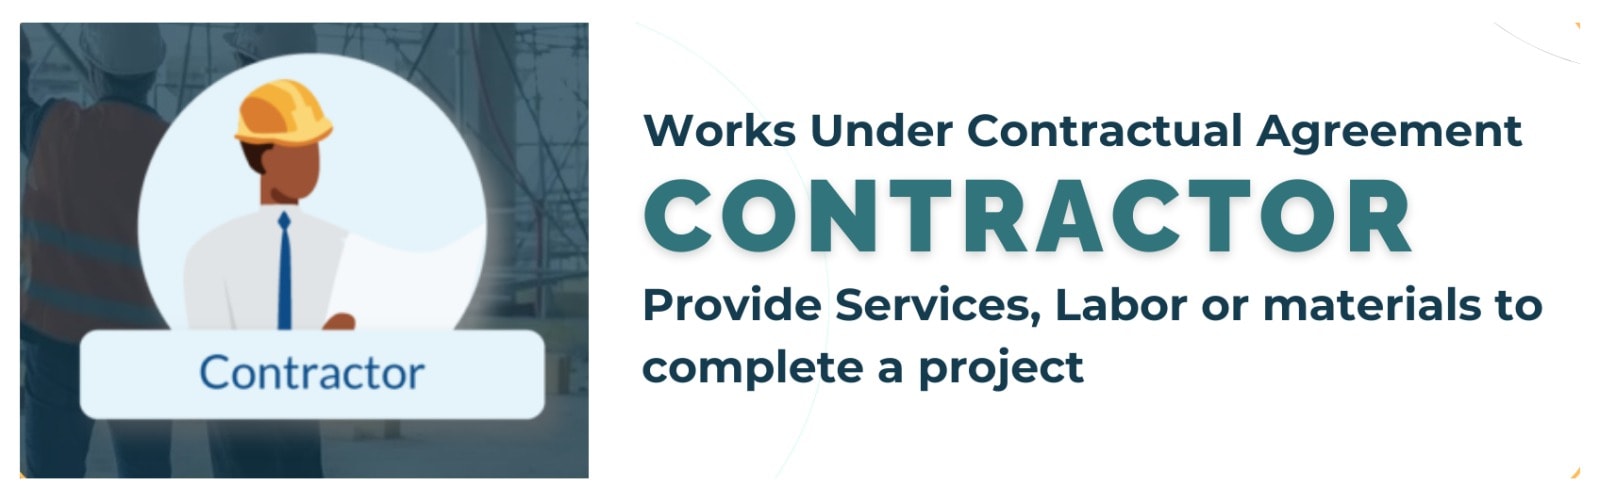 Who is a Contractor?